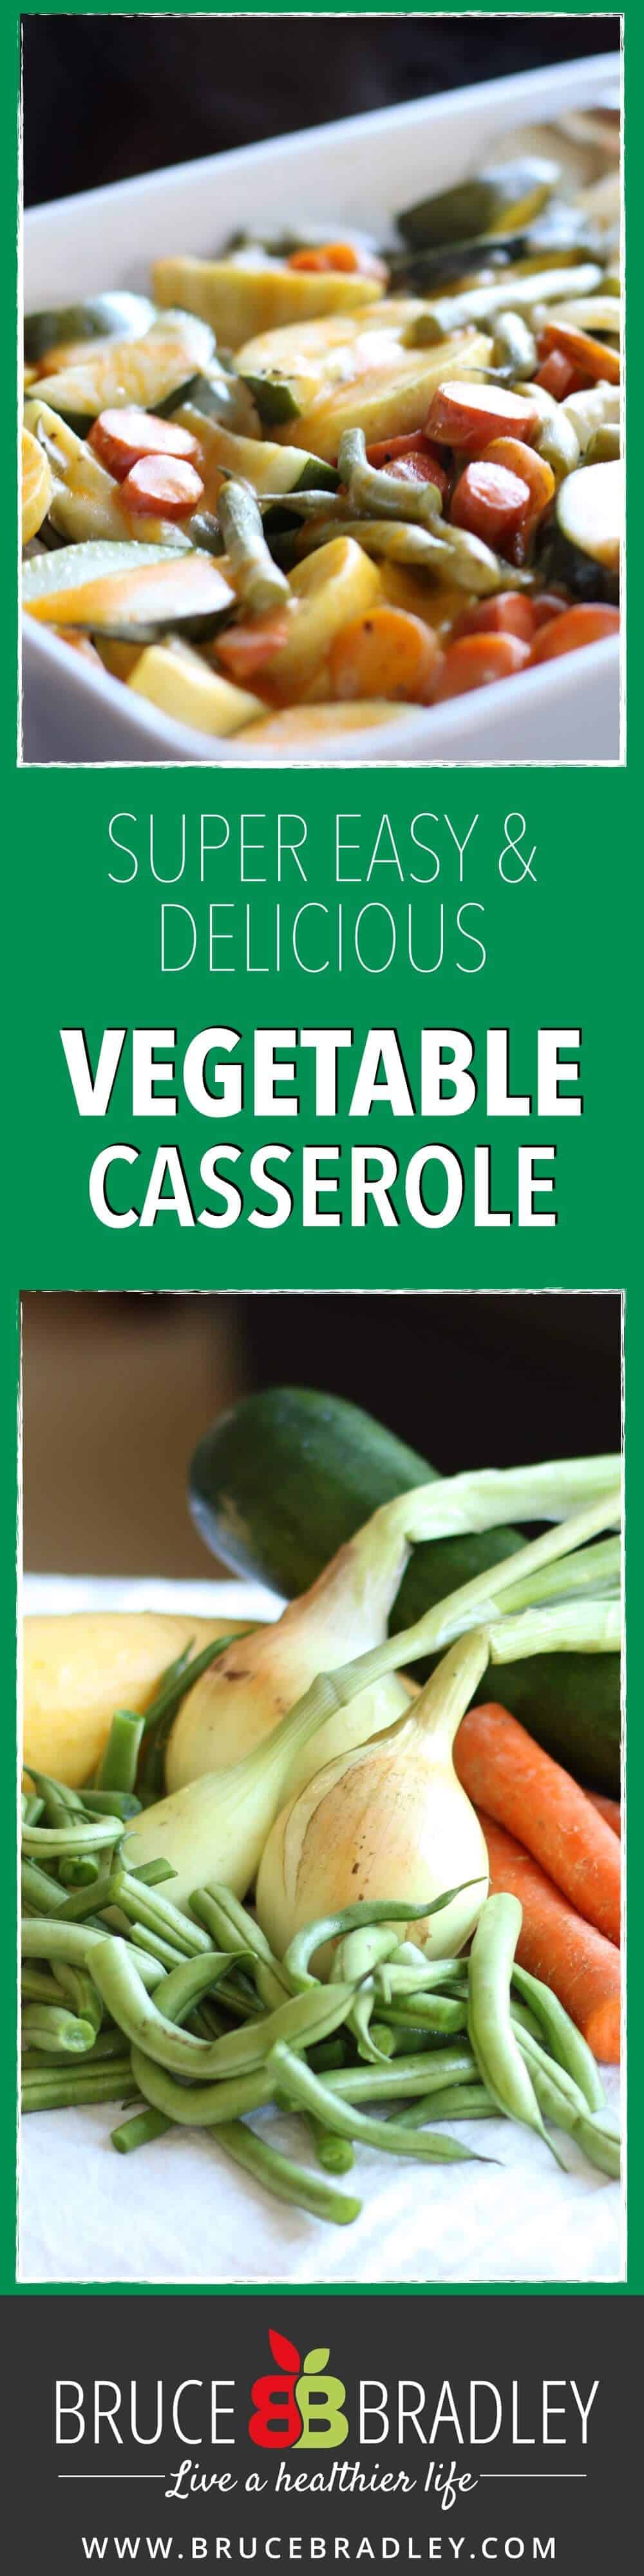 Bruce Bradley'S Vegetable Casserole Is A Simple, Delicious Side Dish That Your Whole Family Will Enjoy!